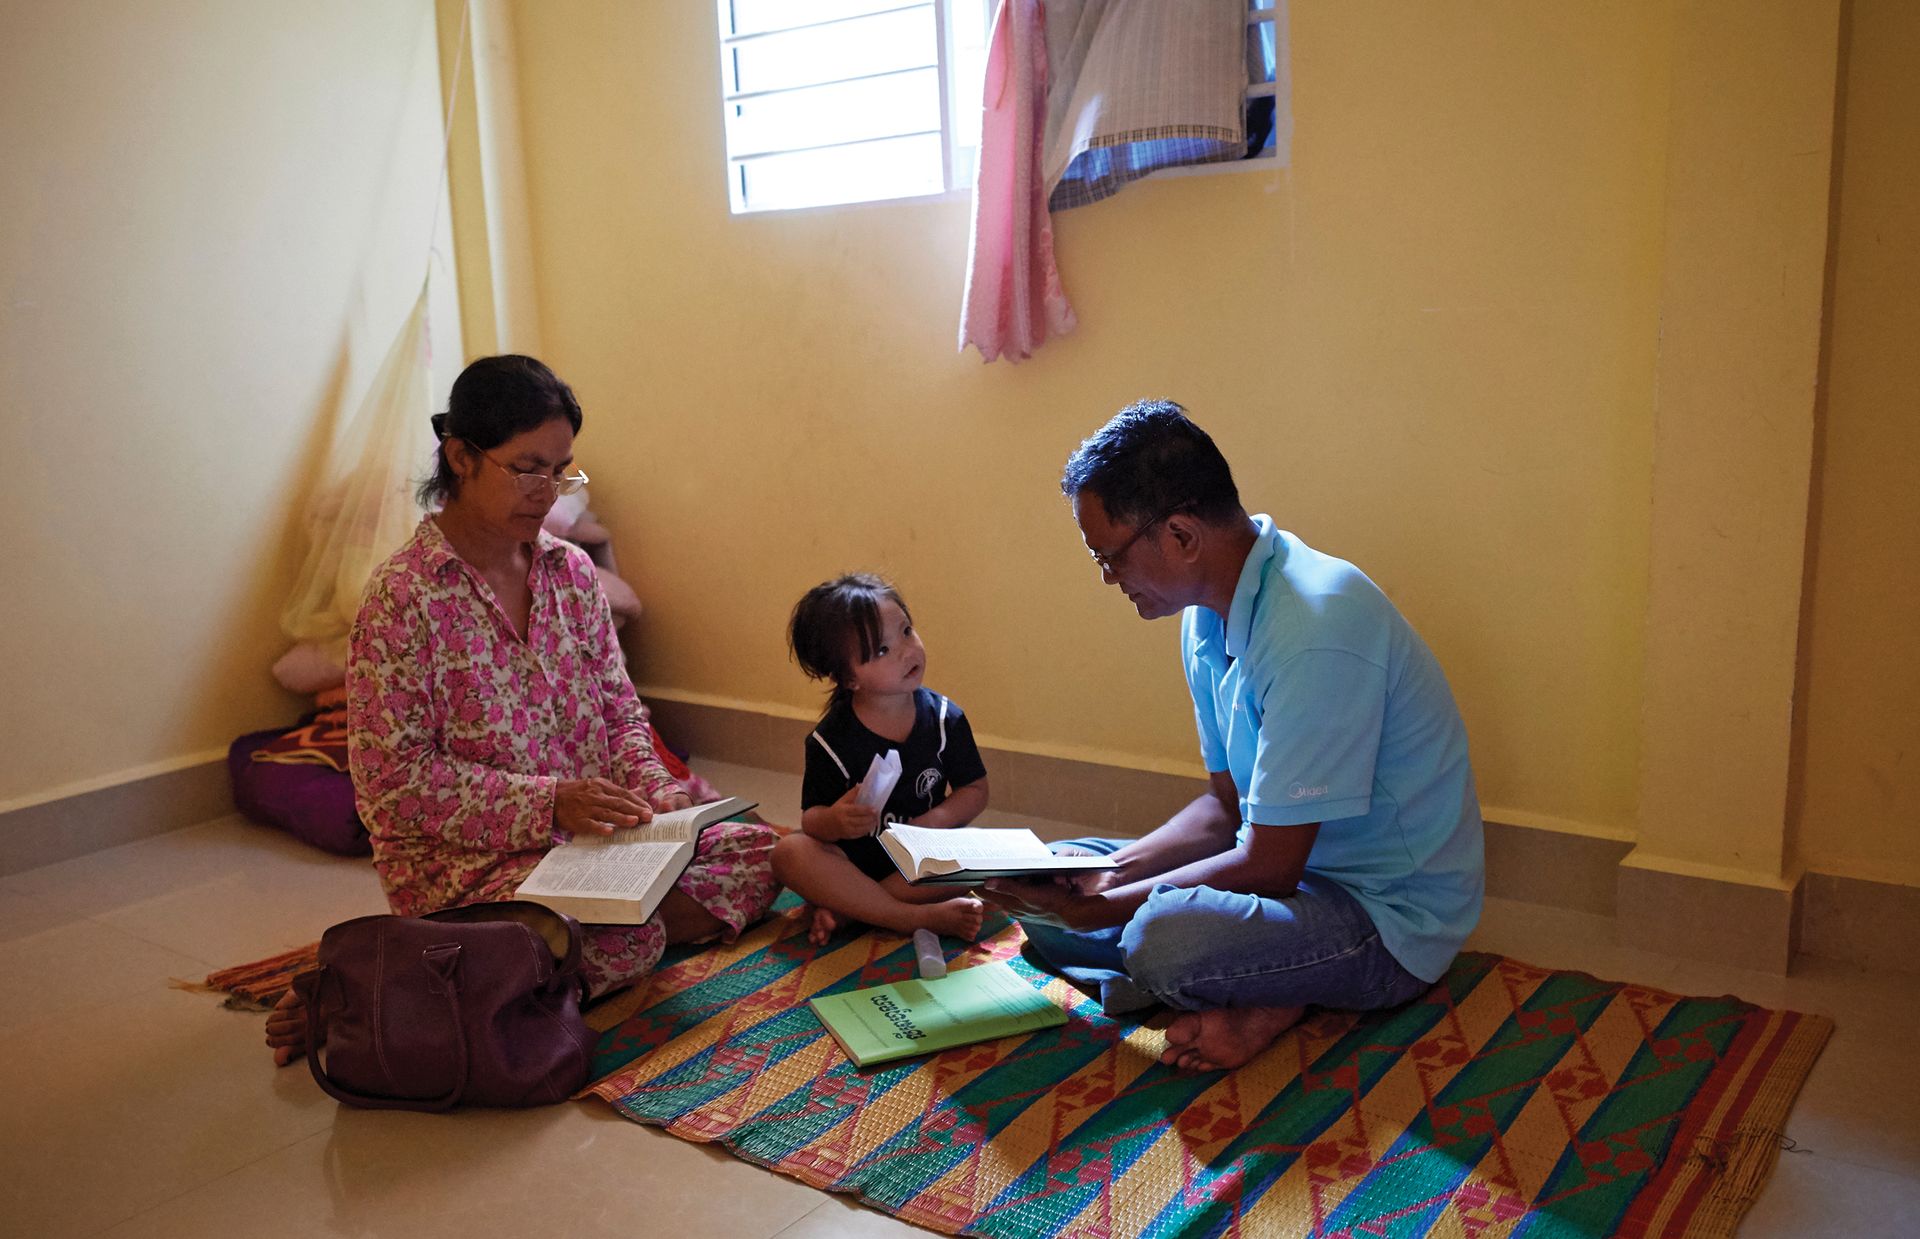 Phan Phon and his wife make sure they teach the gospel to their grandchildren. The gospel of Jesus Christ helped their family move forward after the tragedy of losing their home in a fire.